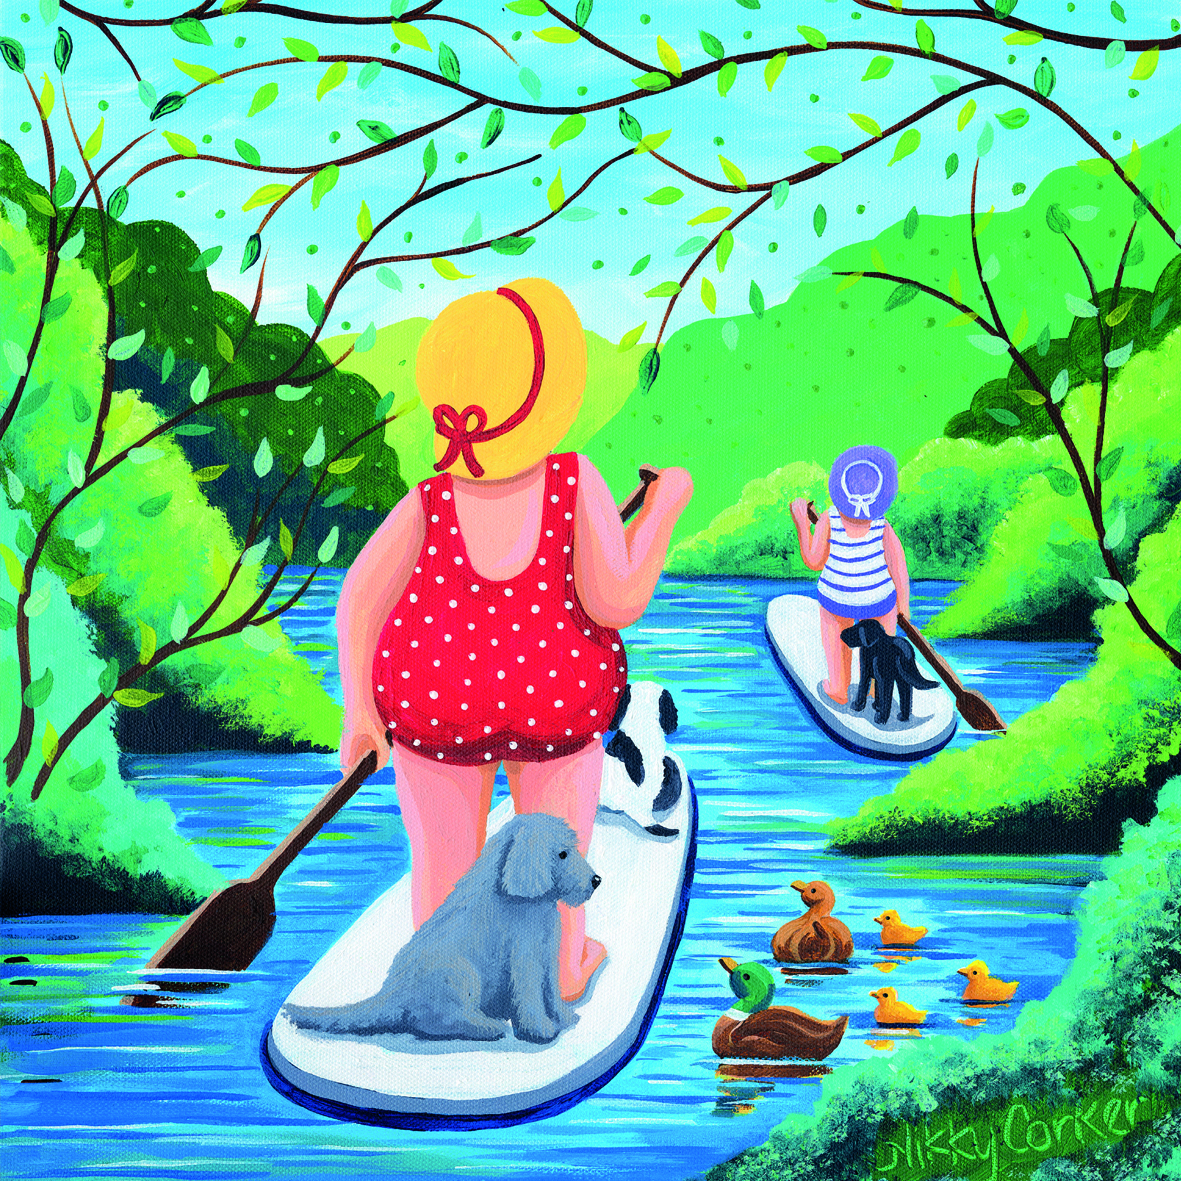 Above: Wild swimming, paddle-boarding and a tranquil scene from Eco-Friendly Card Co’s diverse range